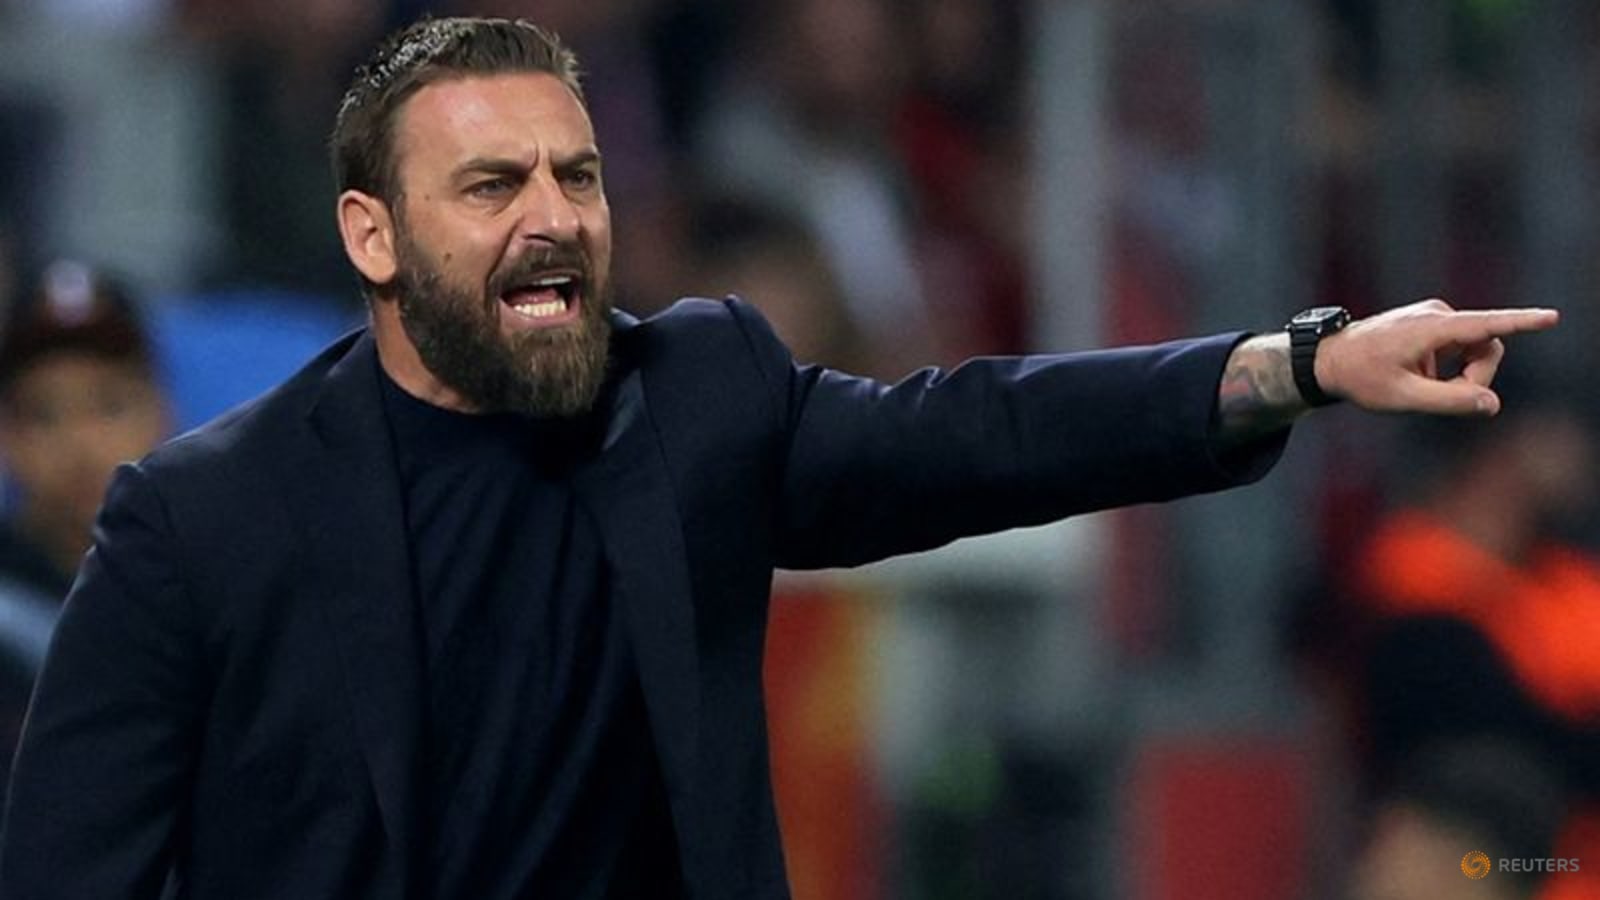 Roma boss De Rossi signs new contract until 2027